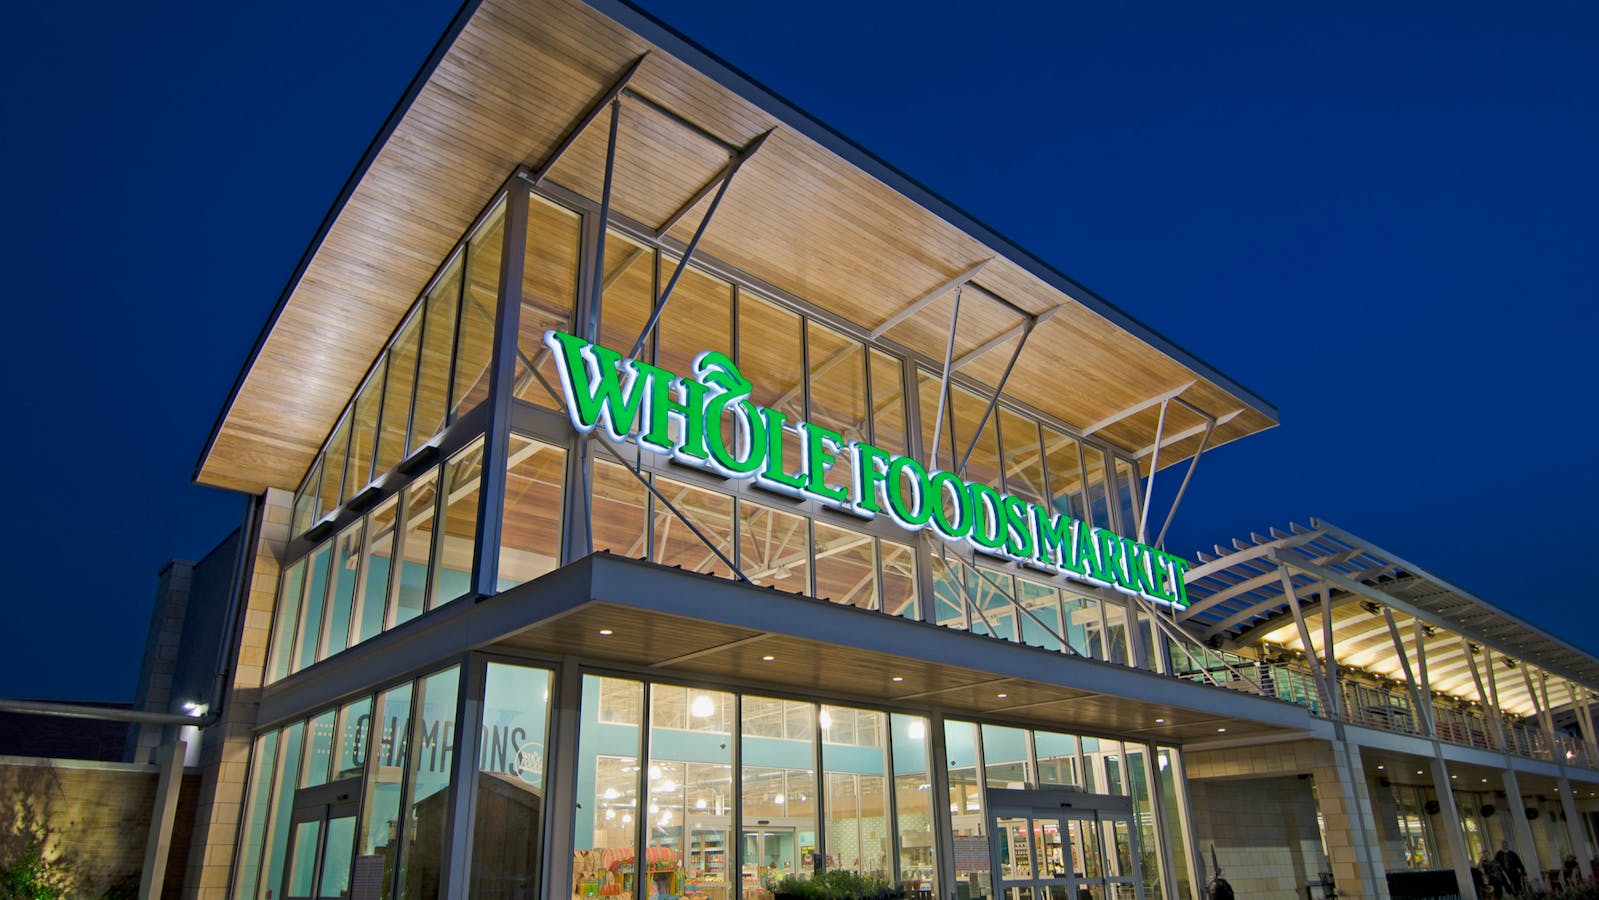 A Whole Foods Market in Houston. Photo provided by Whole Foods